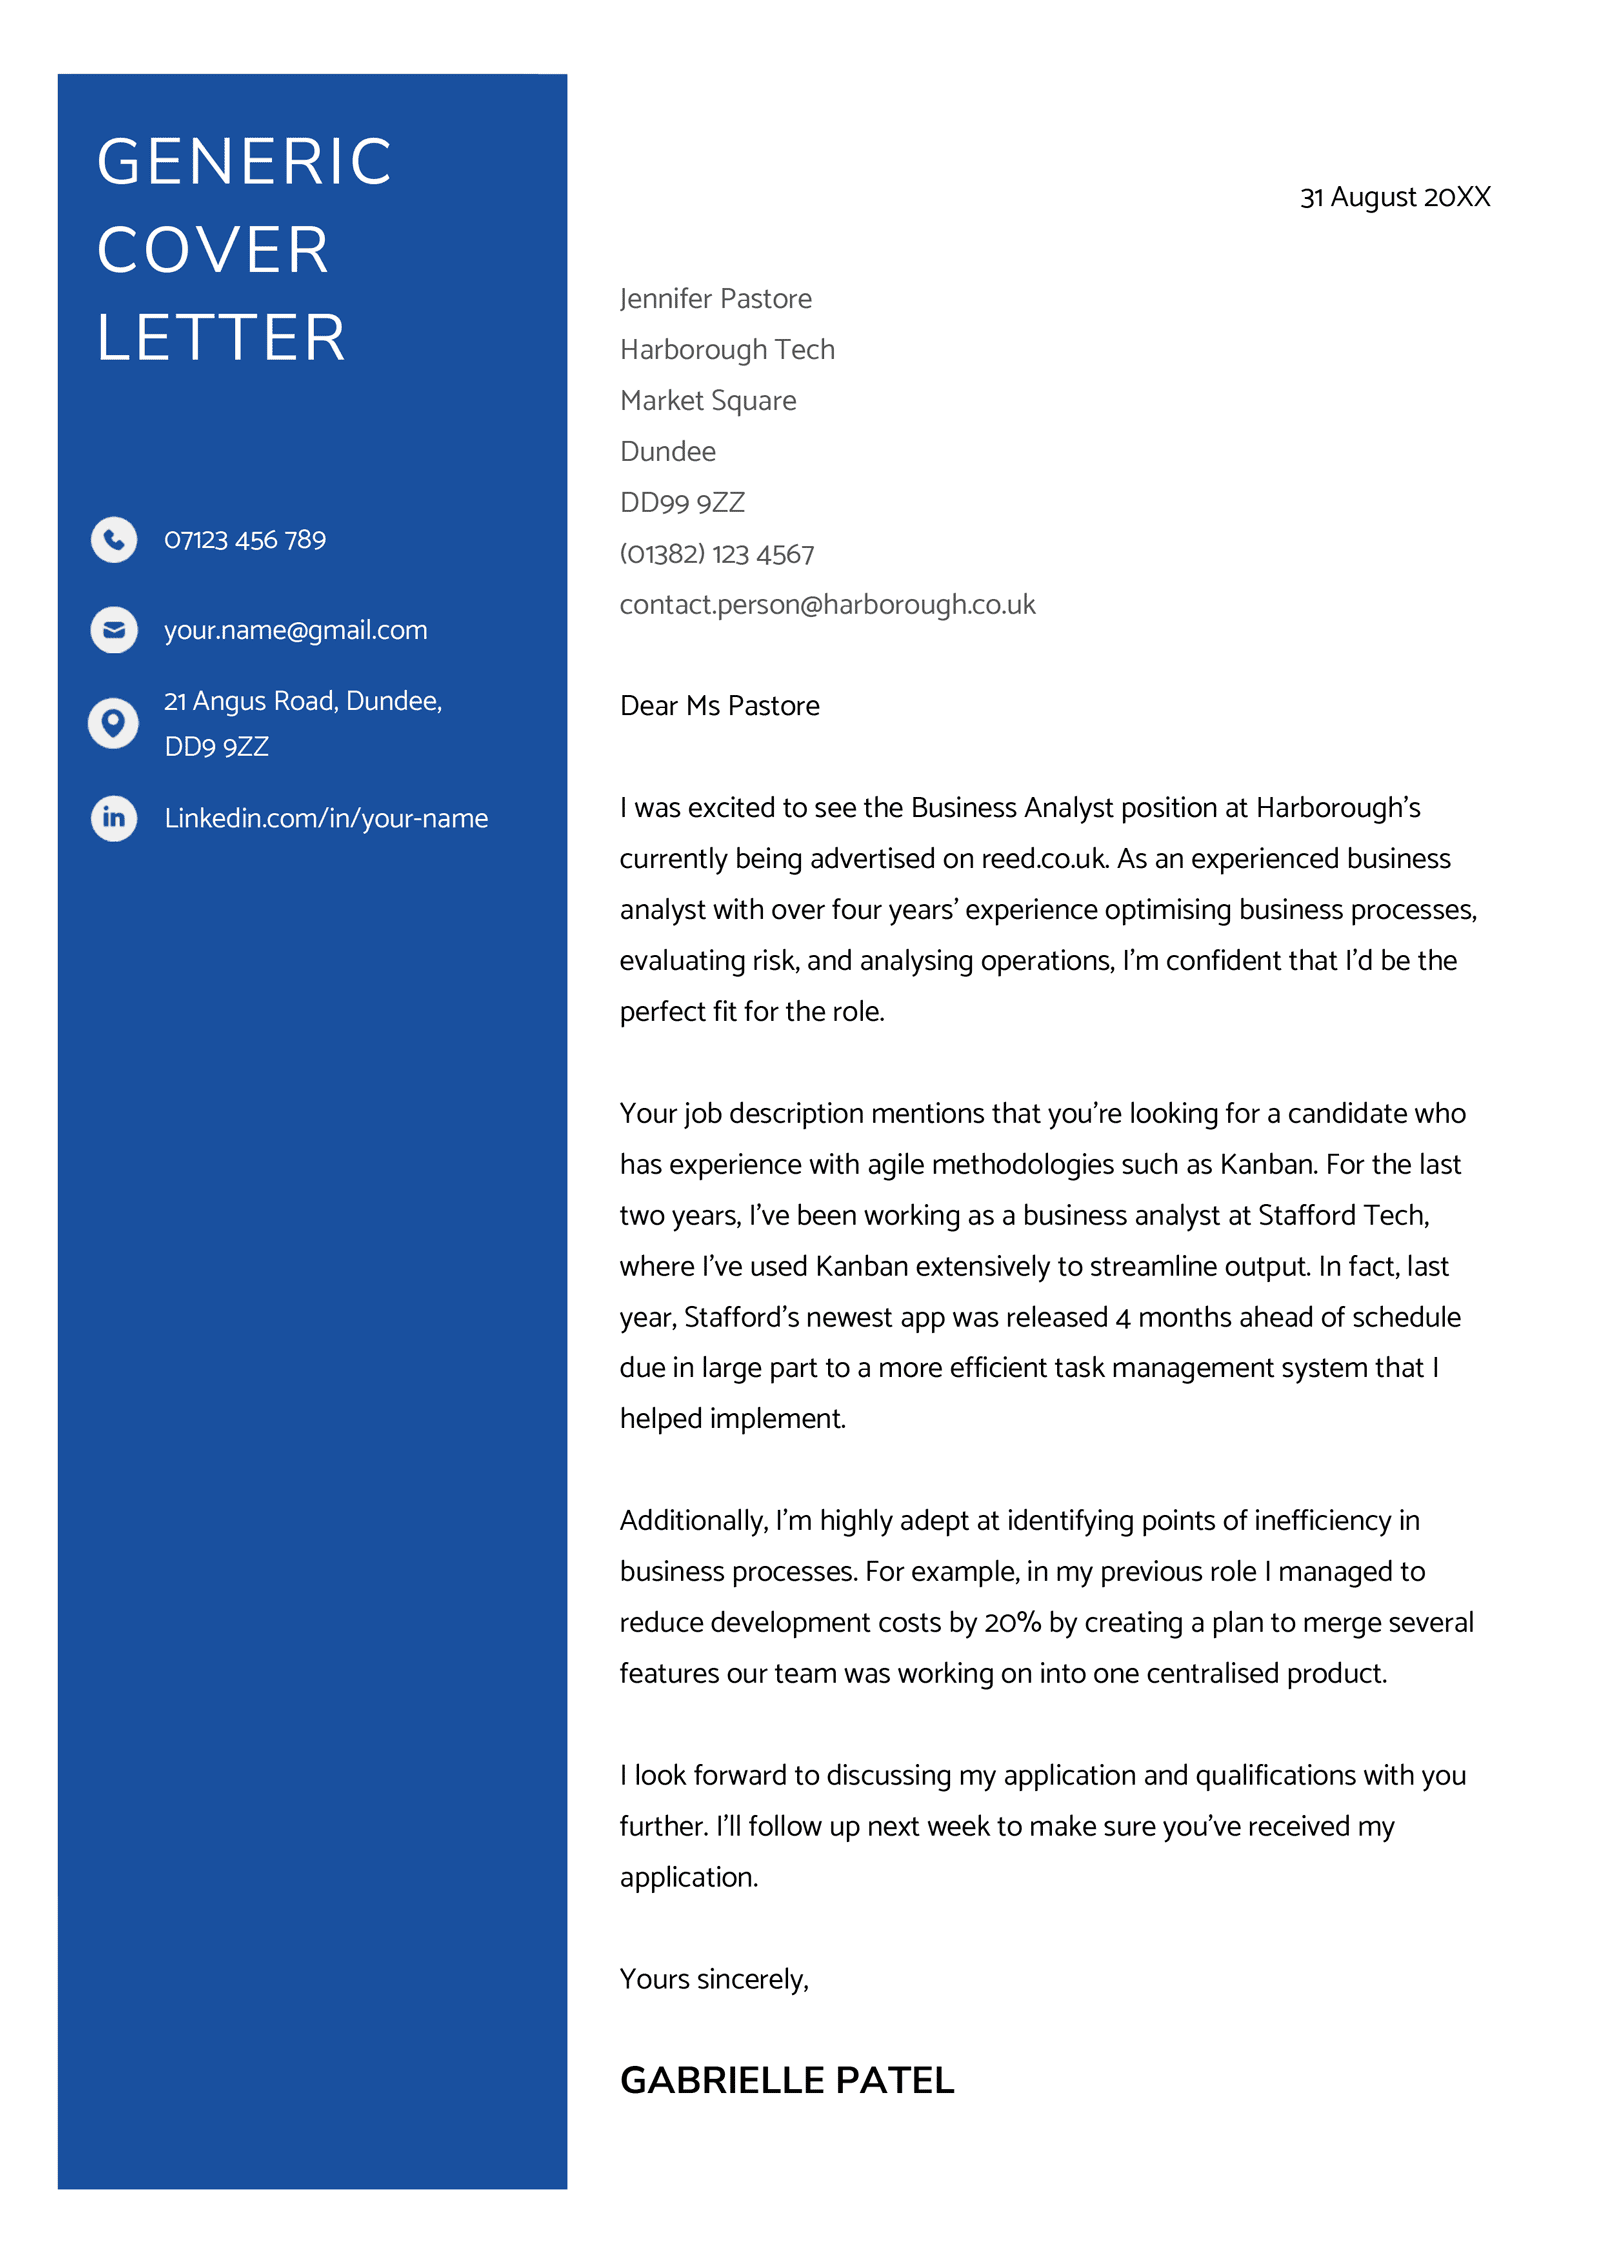 A generic cover letter example